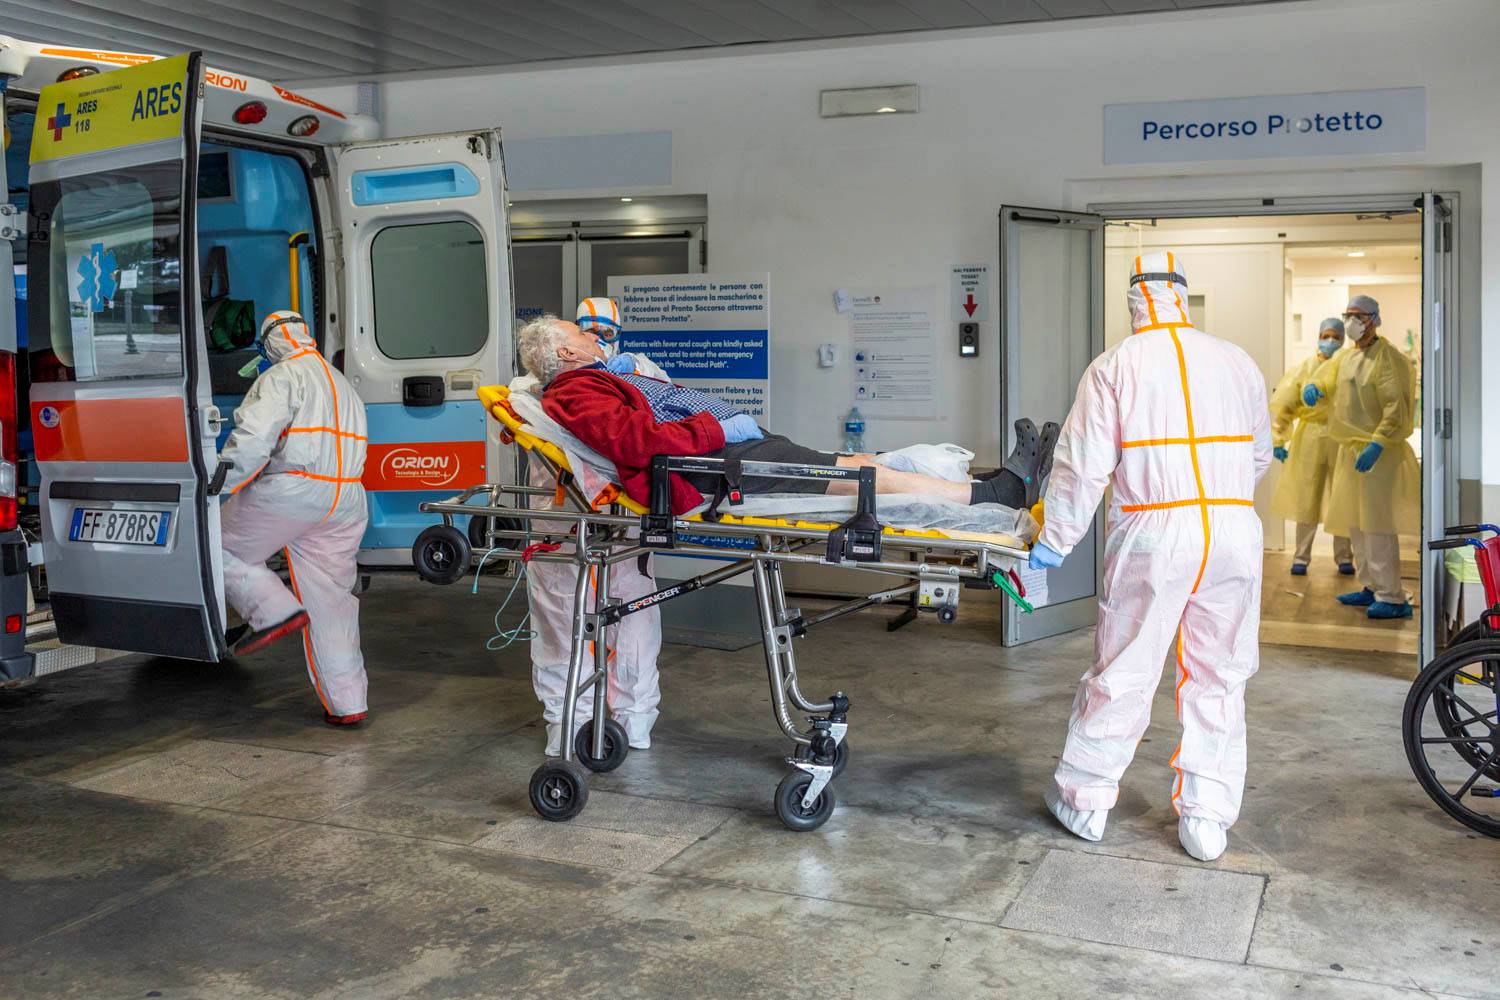 Medical workers in protective suits take an elderly coronavirus patient on a stretcher into an ambulance in the emergency room of the Gemelli Hospital, in Rome